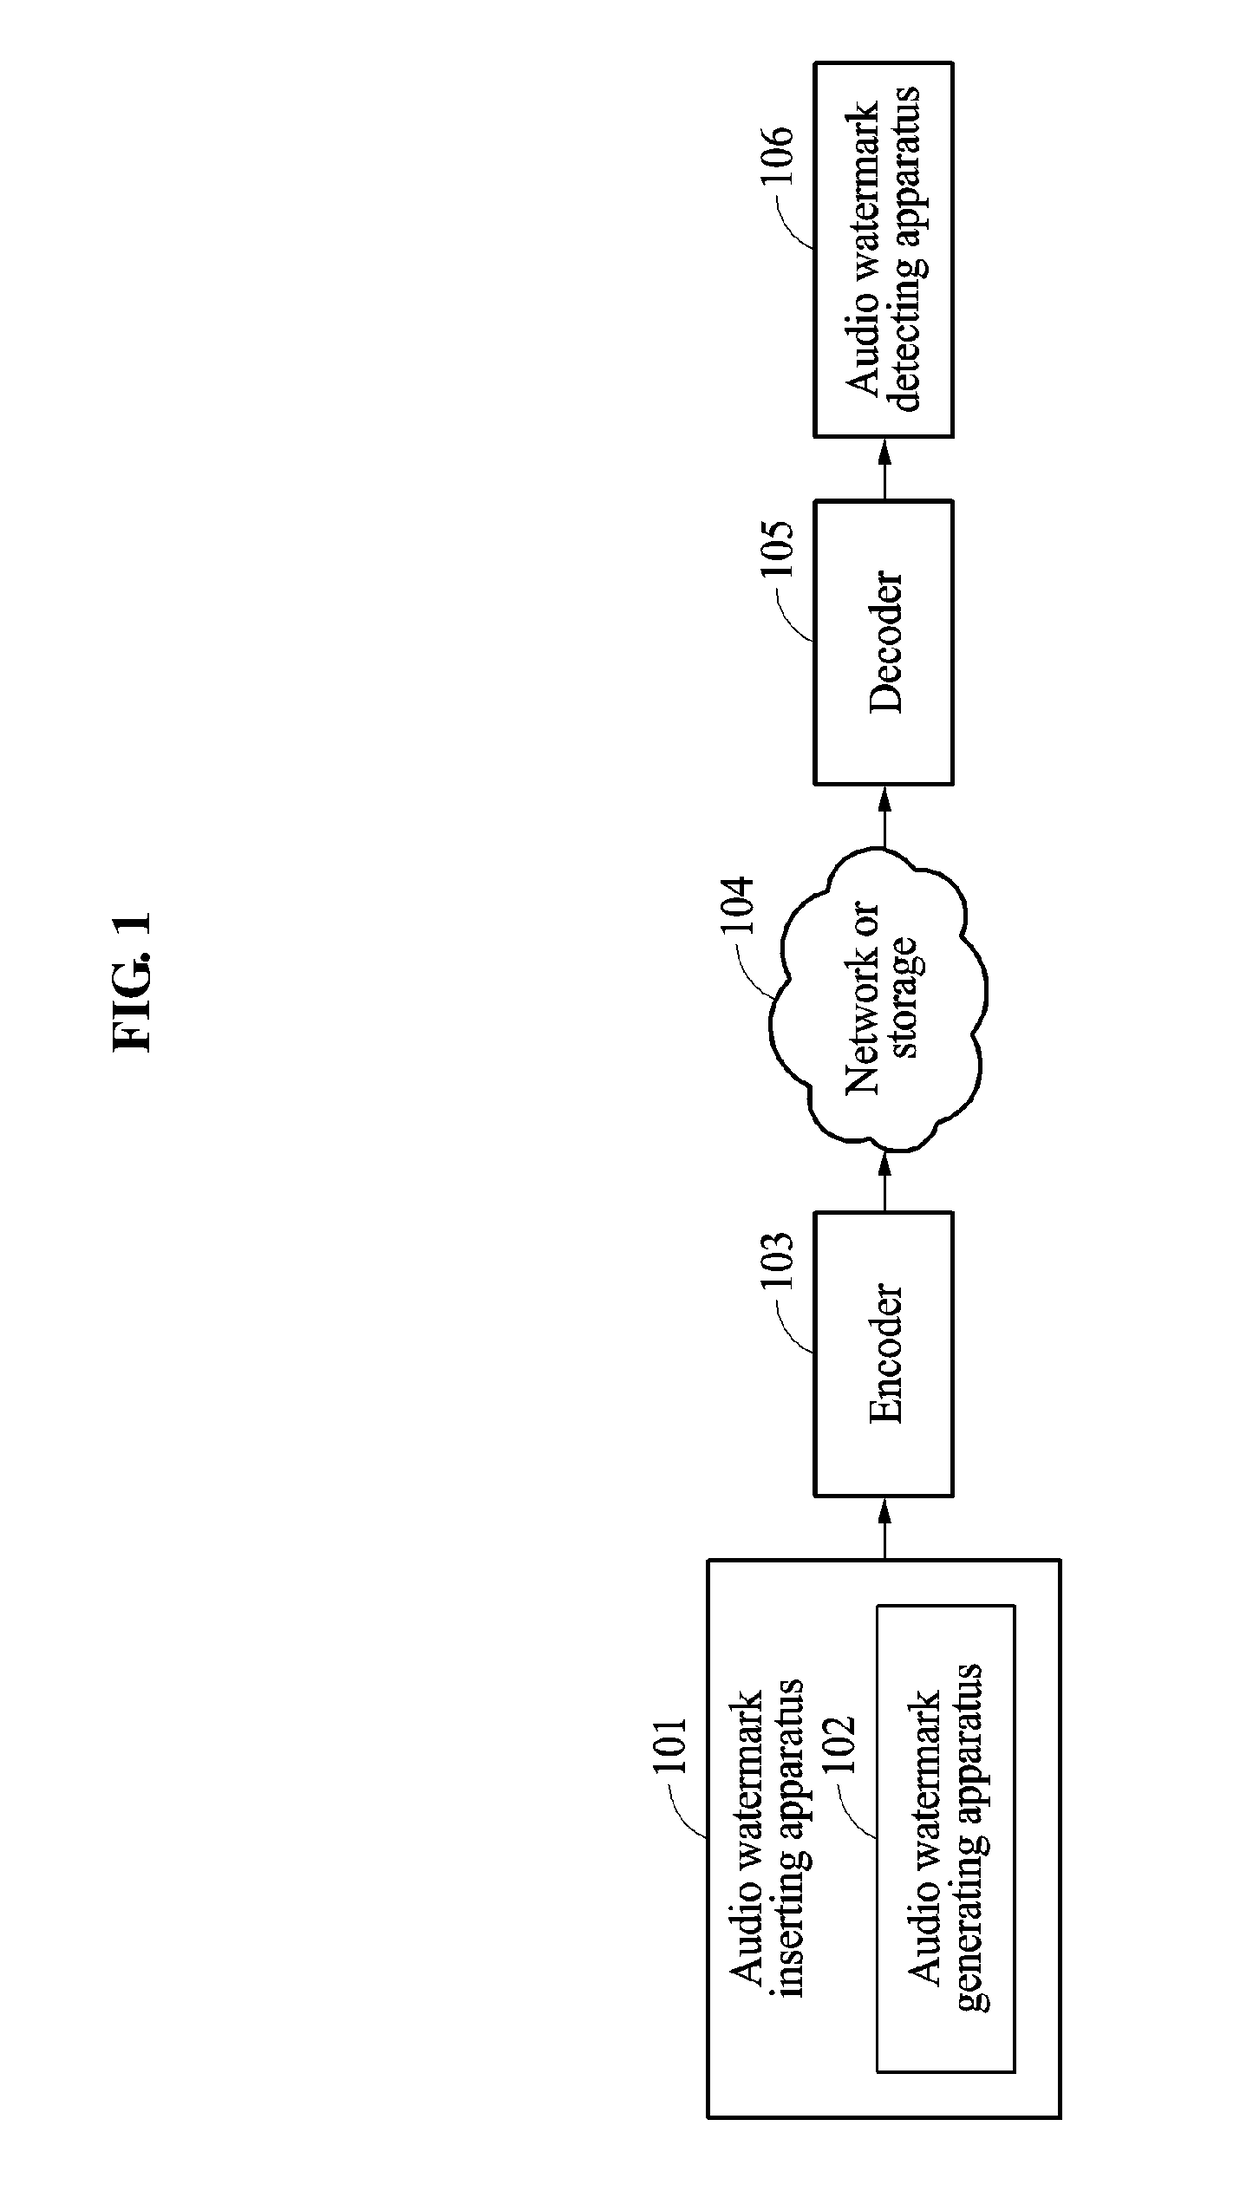 Method and apparatus for inserting watermark to audio signal and detecting watermark from audio signal